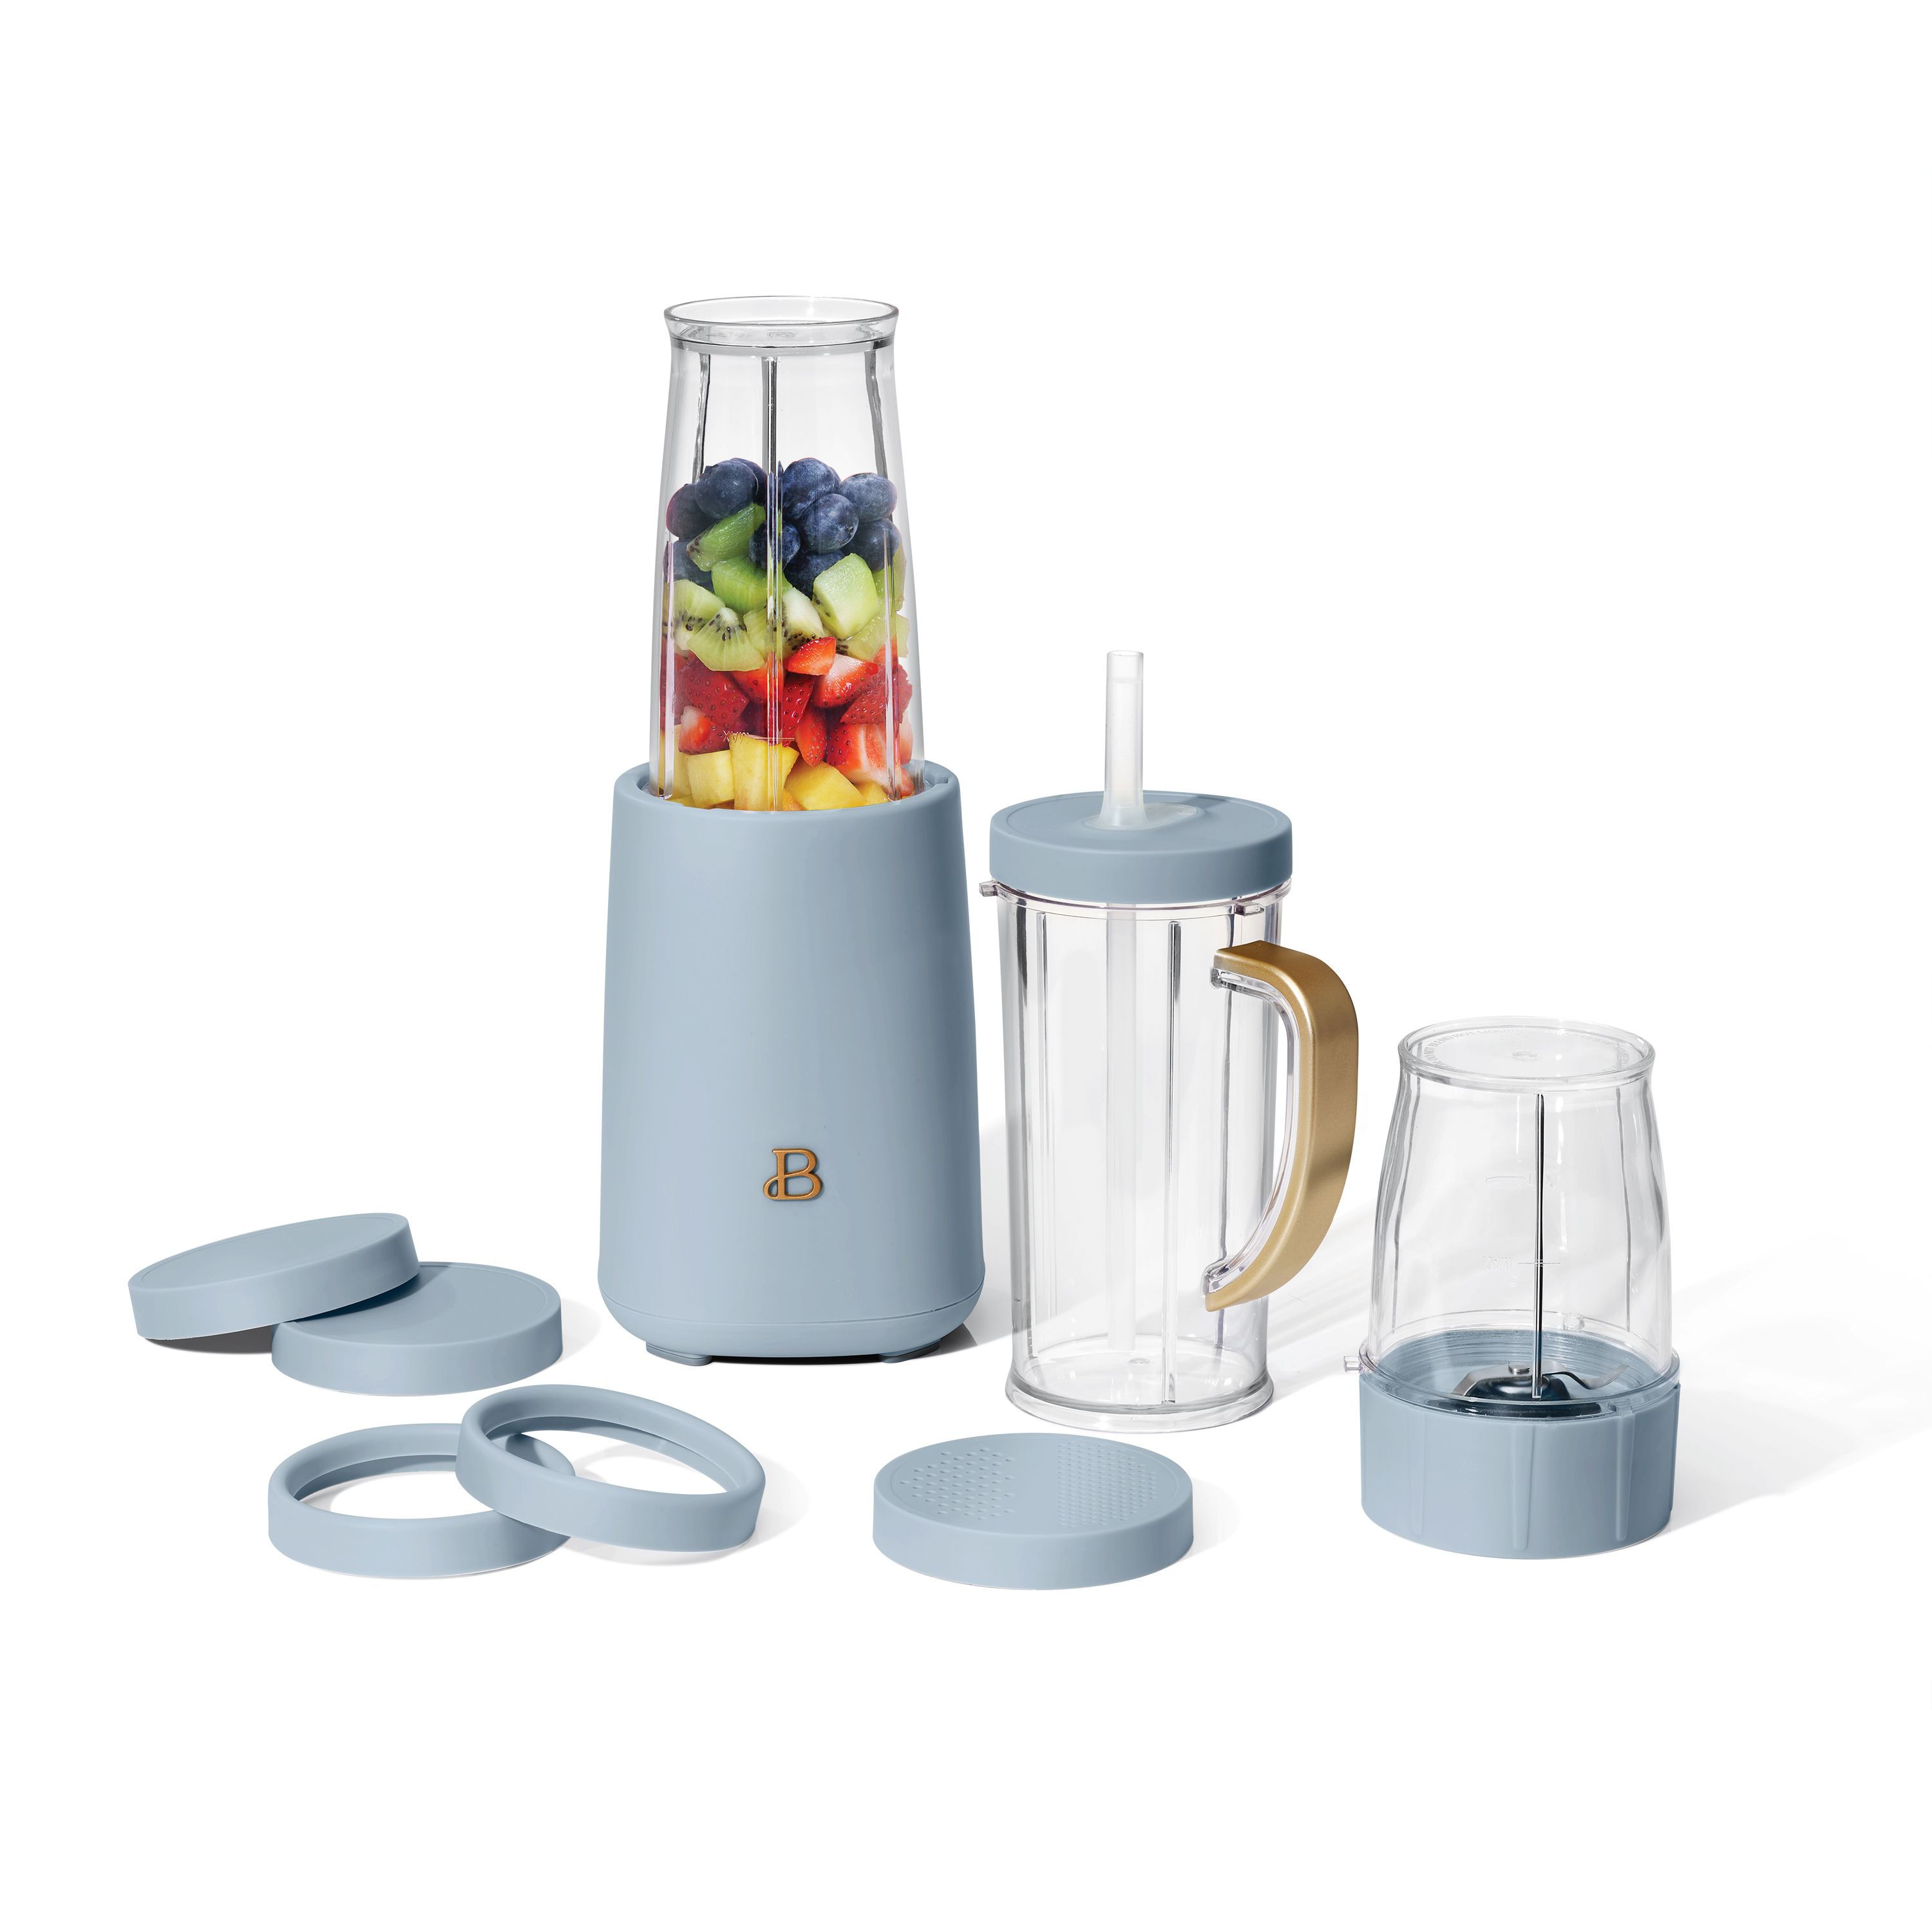 Beautiful Personal Blender Set with 12 Pieces, 240 W, Cornflower Blue by Drew Barrymore | Walmart (US)